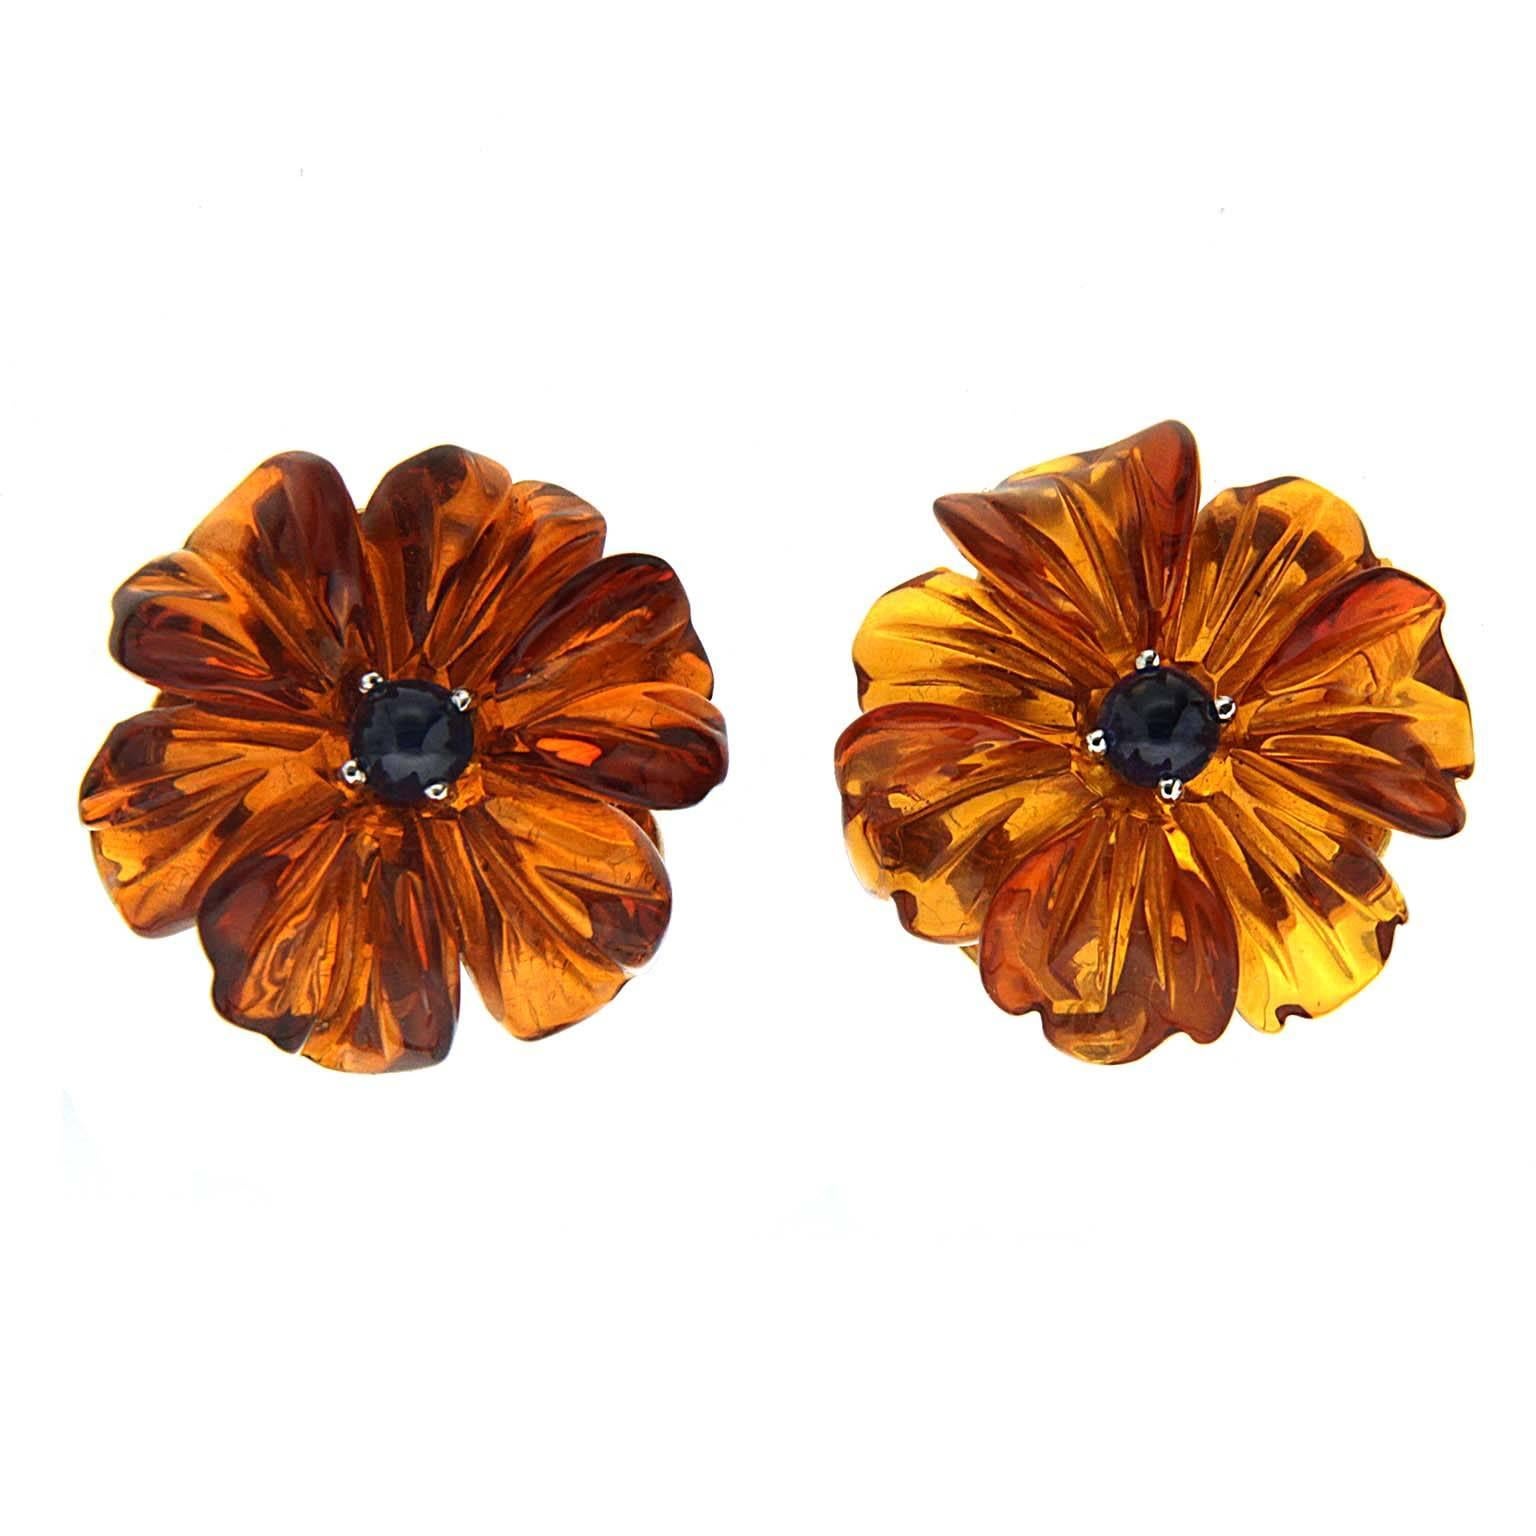 Sapphire Cabochon Amber Gold Flower Earrings